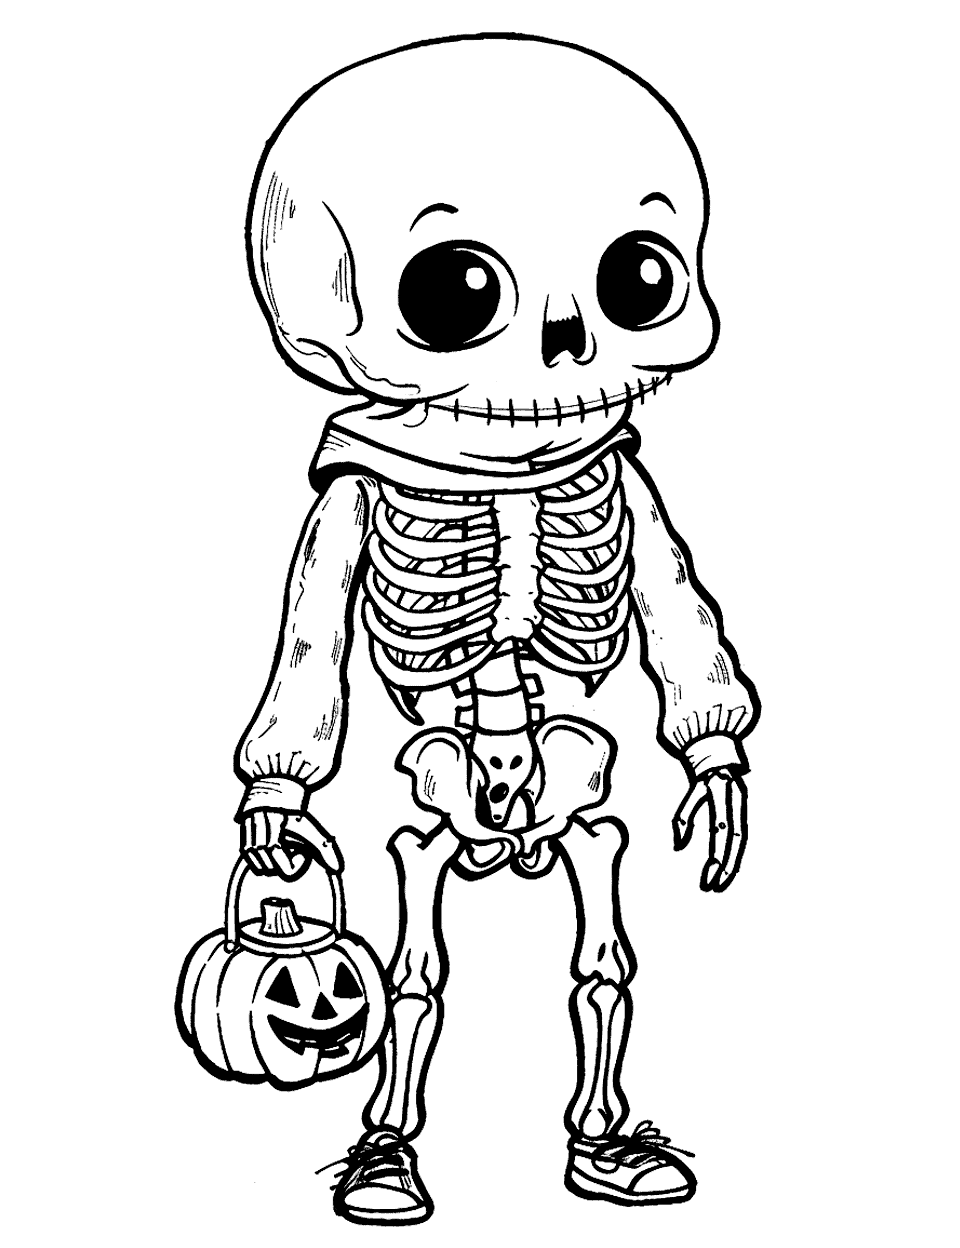 Skeleton Dressed for Halloween Coloring Page - A skeleton in costume trick-or-treating.